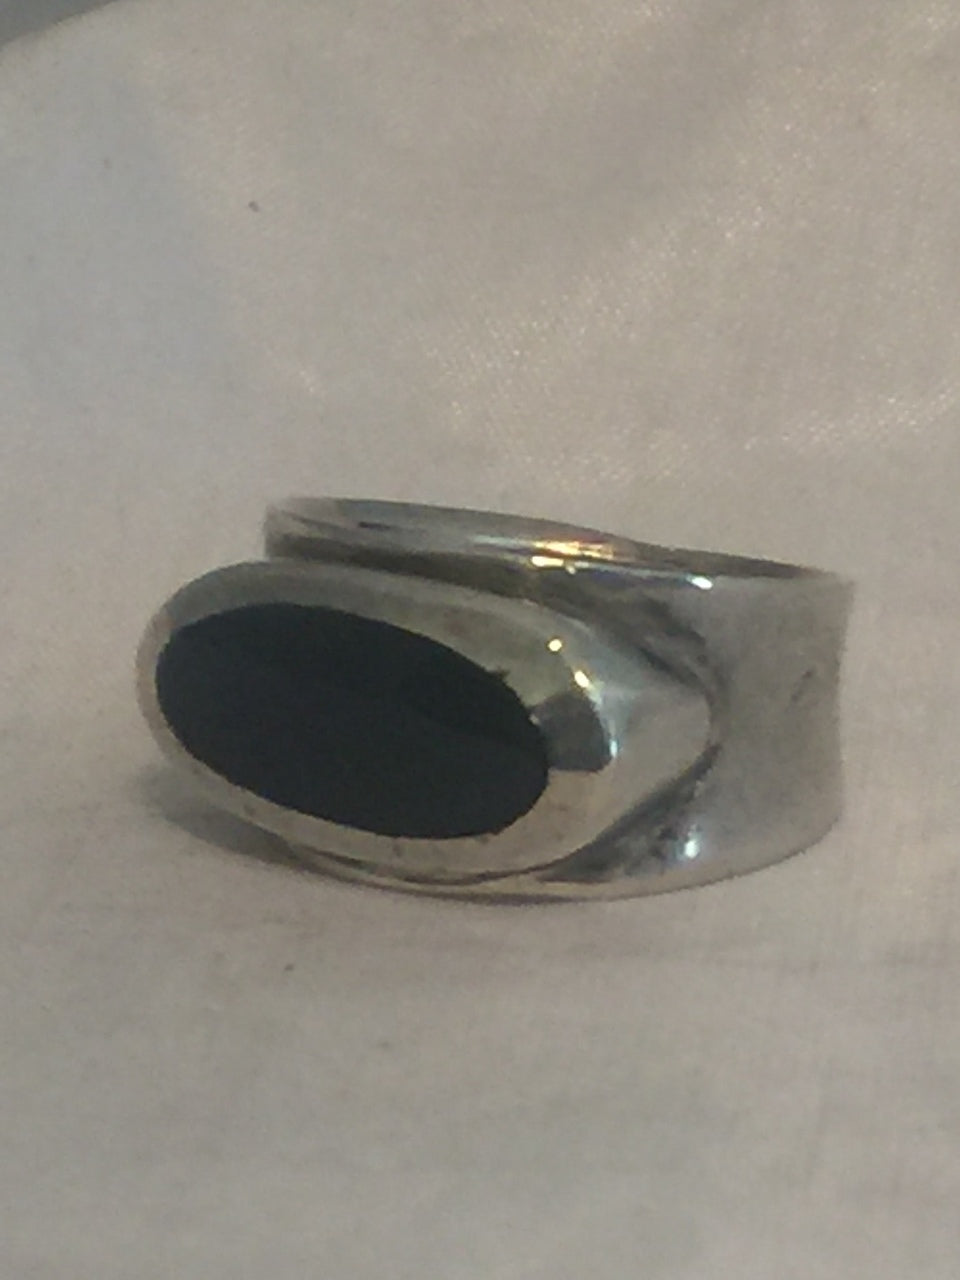 Vintage Sterling Silver Onyx Ring Band Southwest Size 6.25  8g